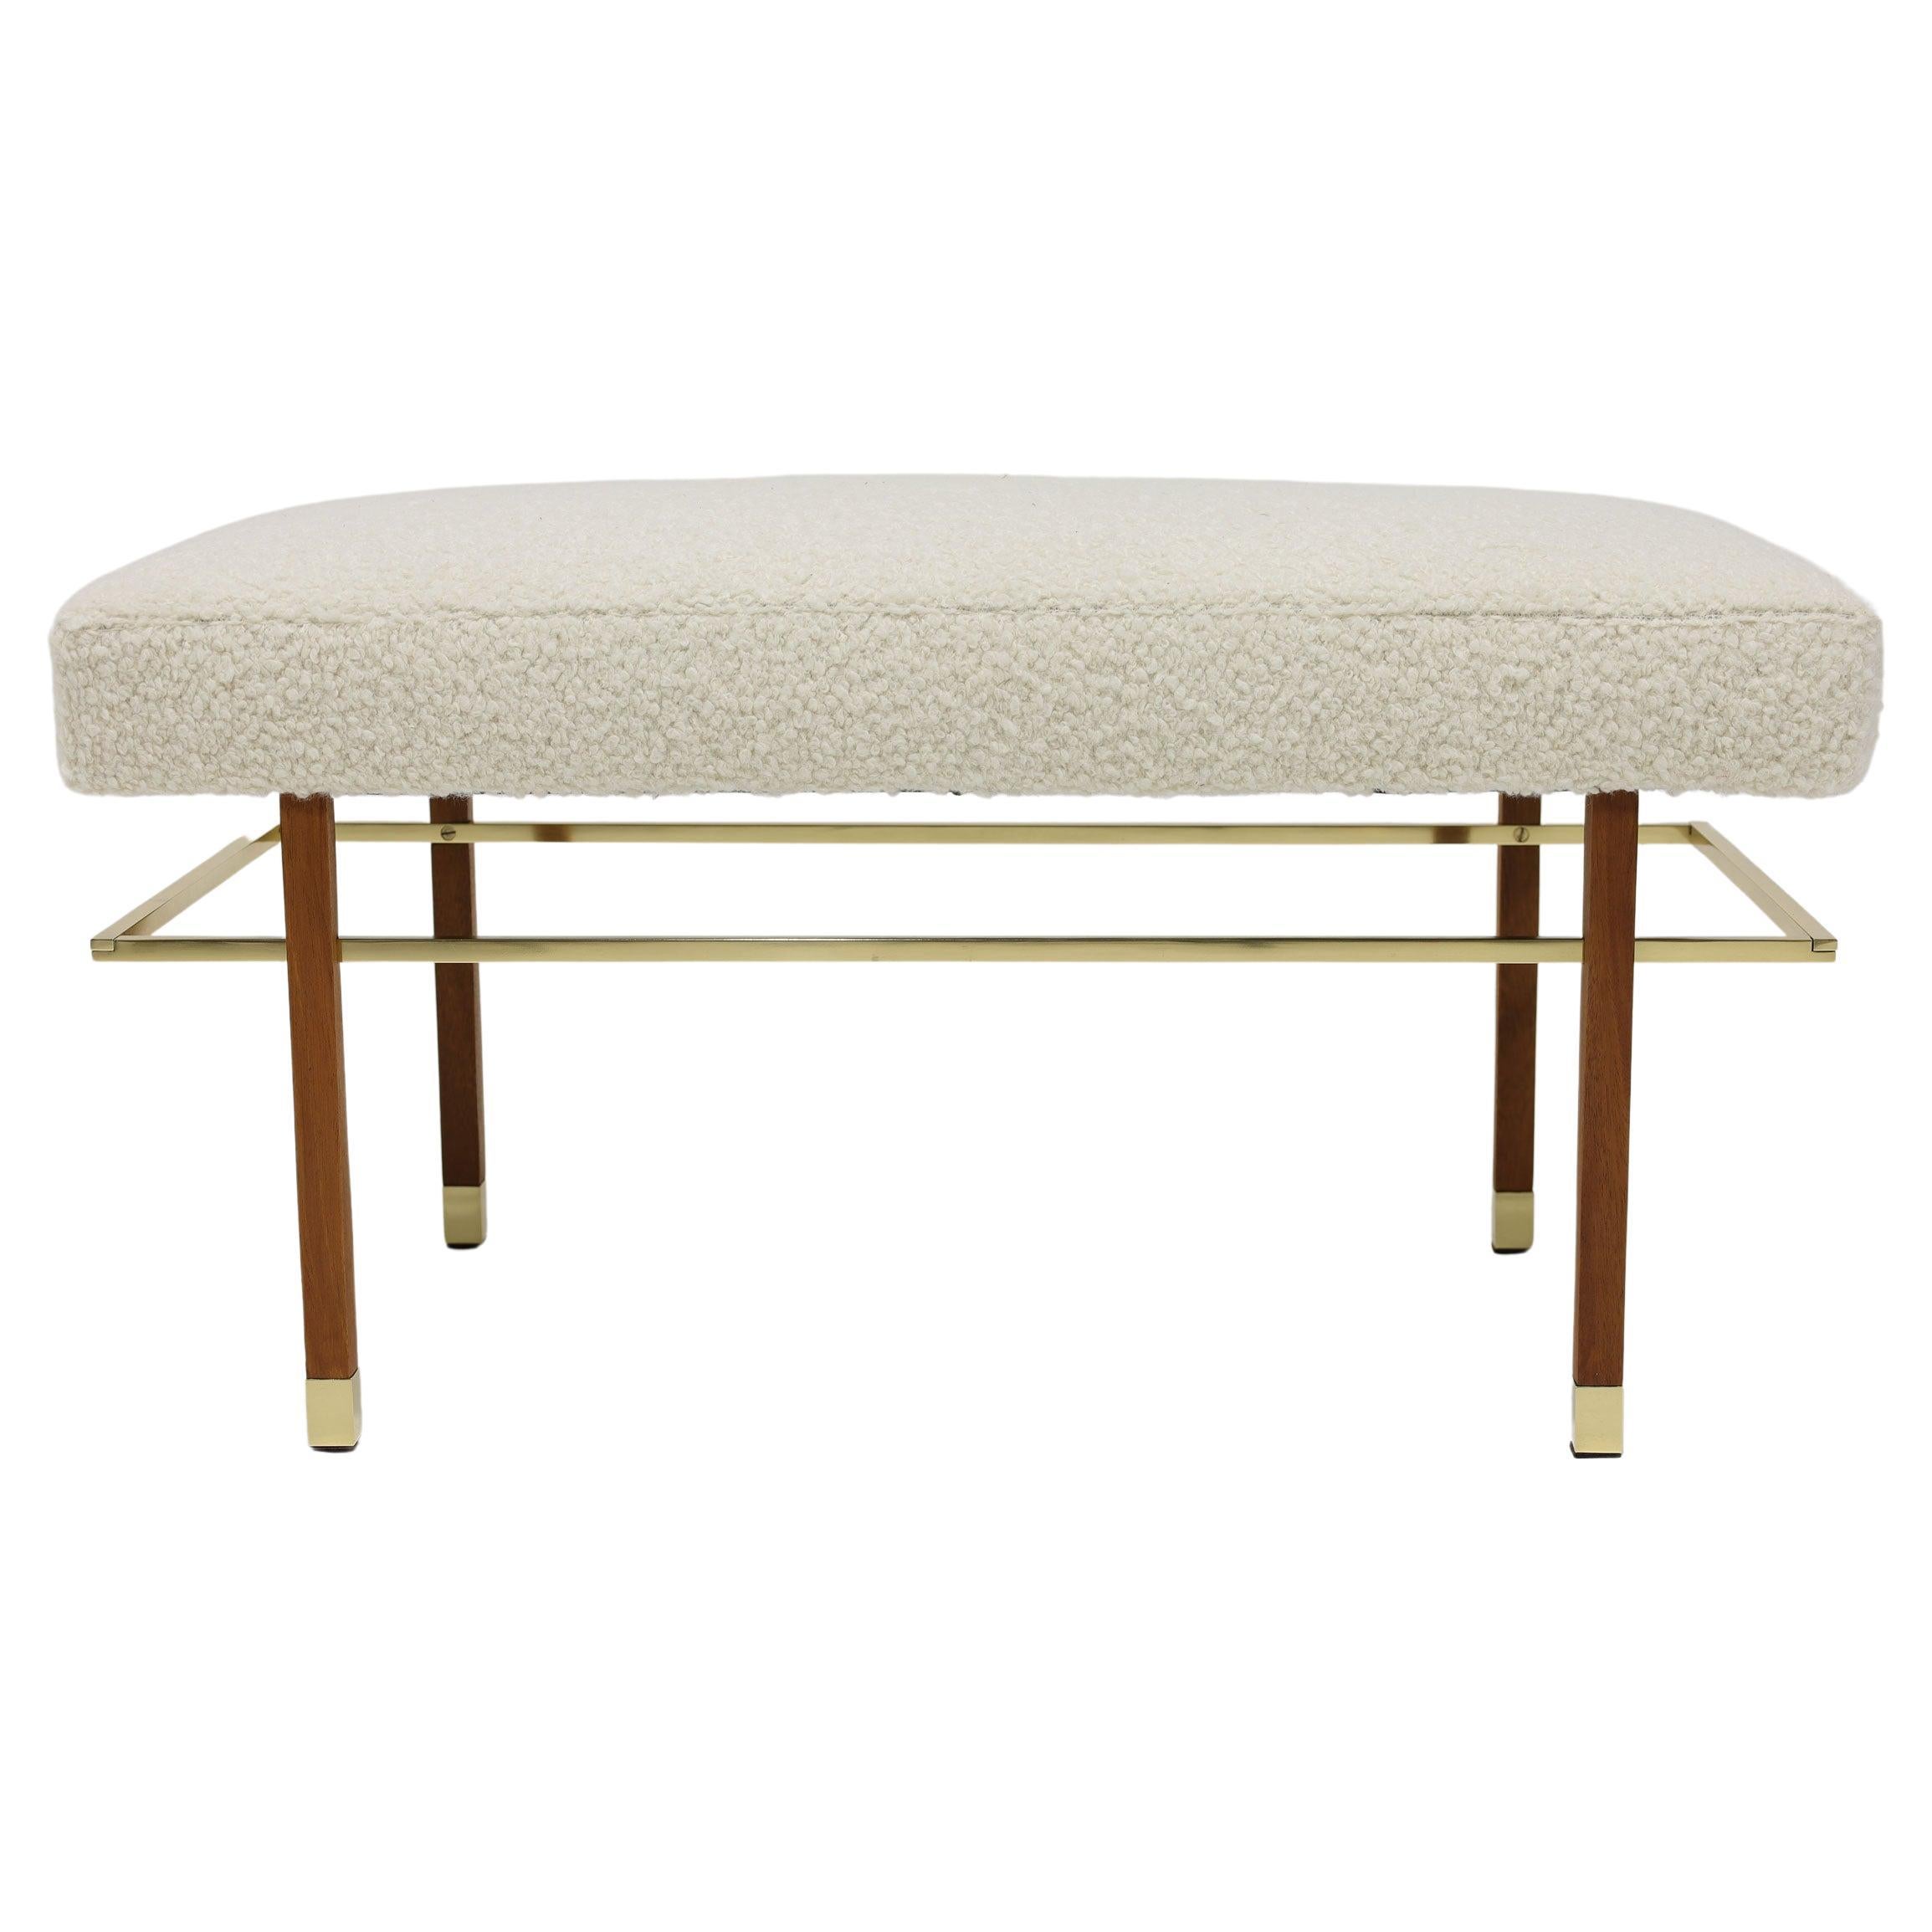 Harvey Probber Bench in Holly Hunt Upholstery with Brass Trim